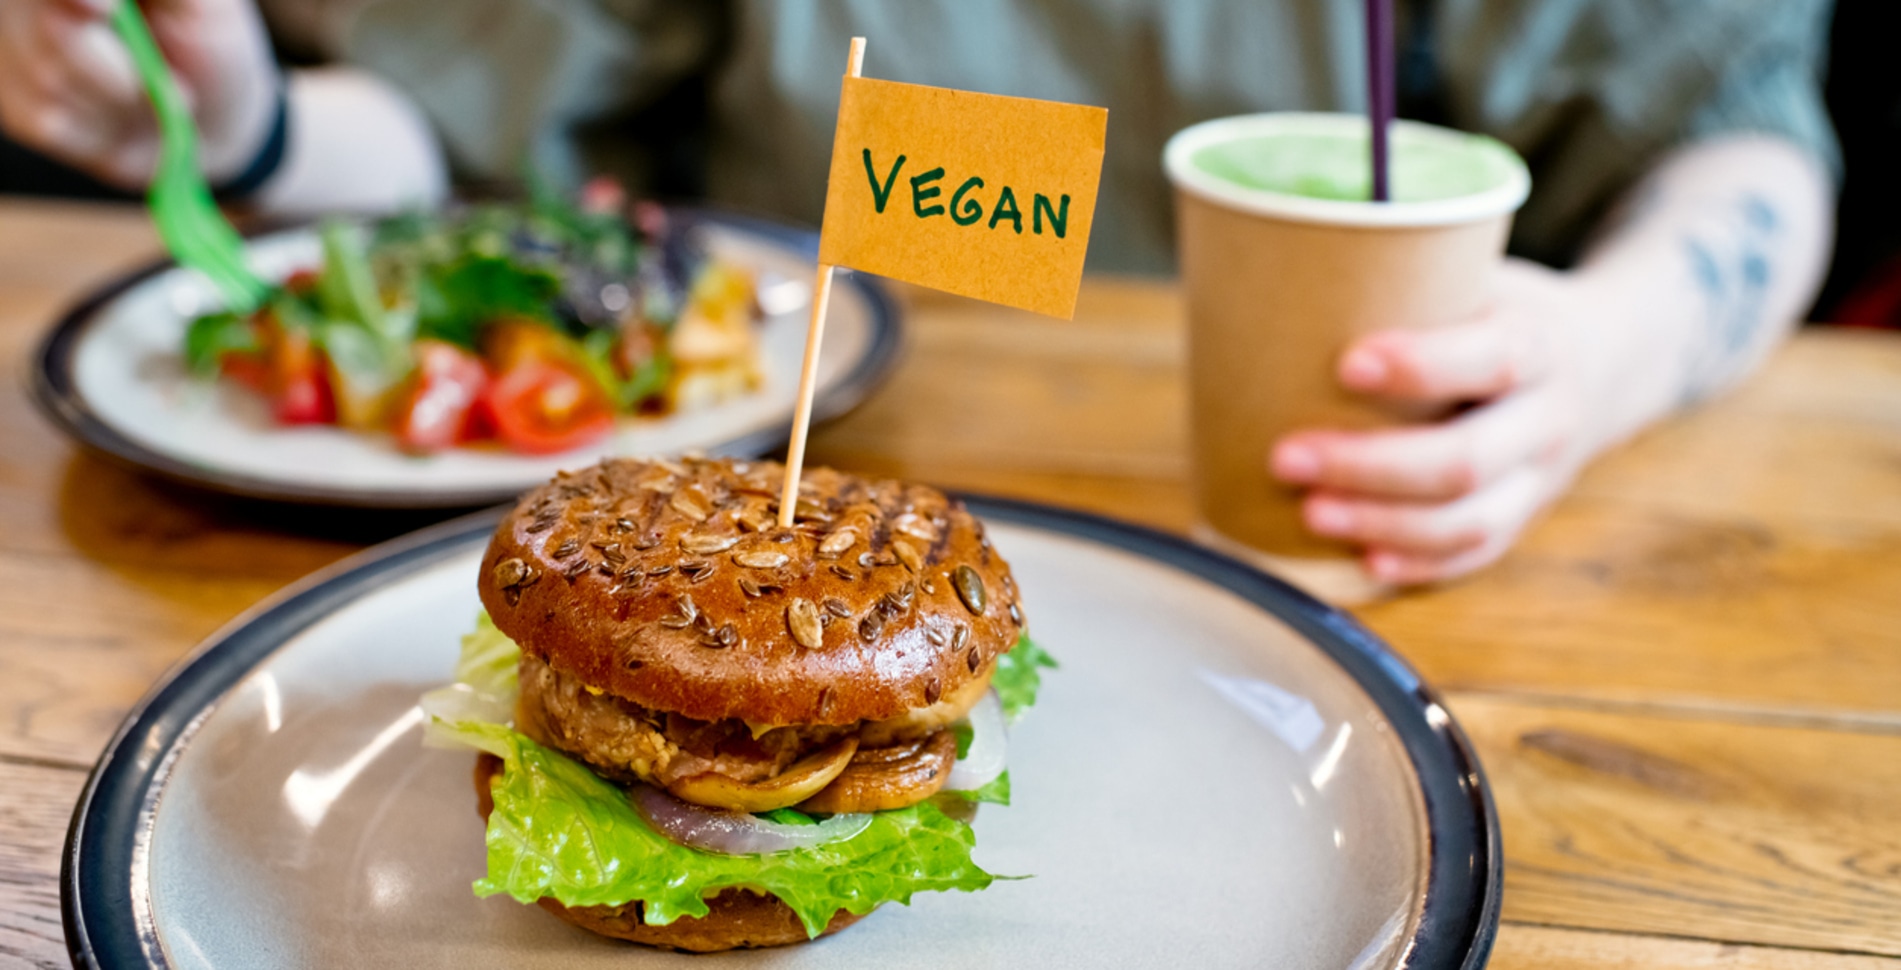 How Do You Actually Pronounce "Vegan?" Hint: Not Like Trump Does